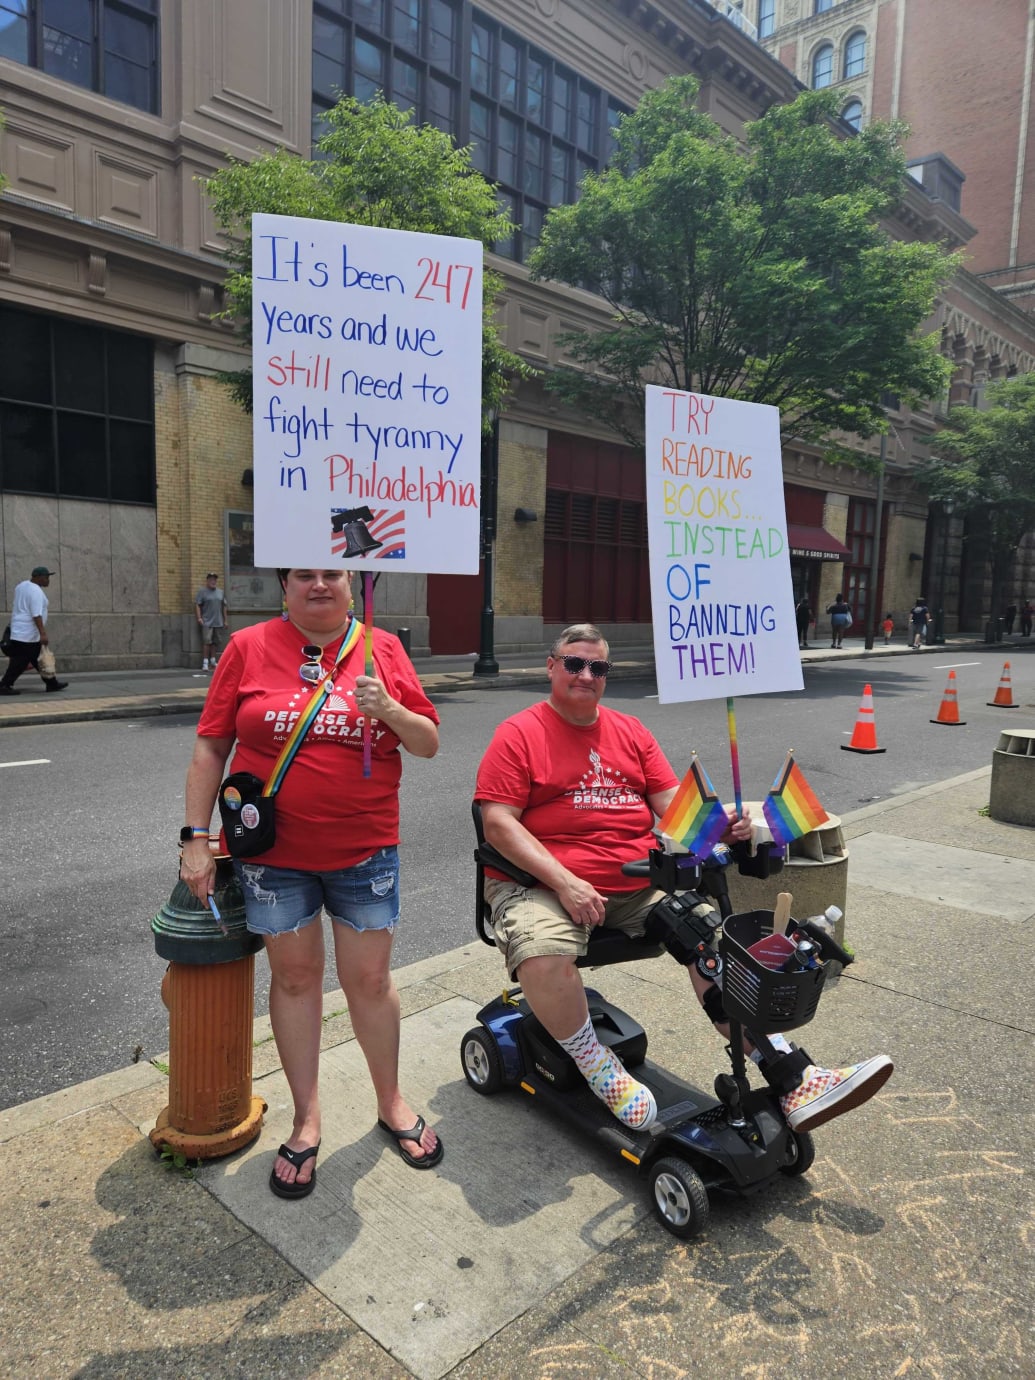 Protesters turned out in opposition to Moms For Liberty’s book bans and the group’s anti-LGBTQ agenda. 